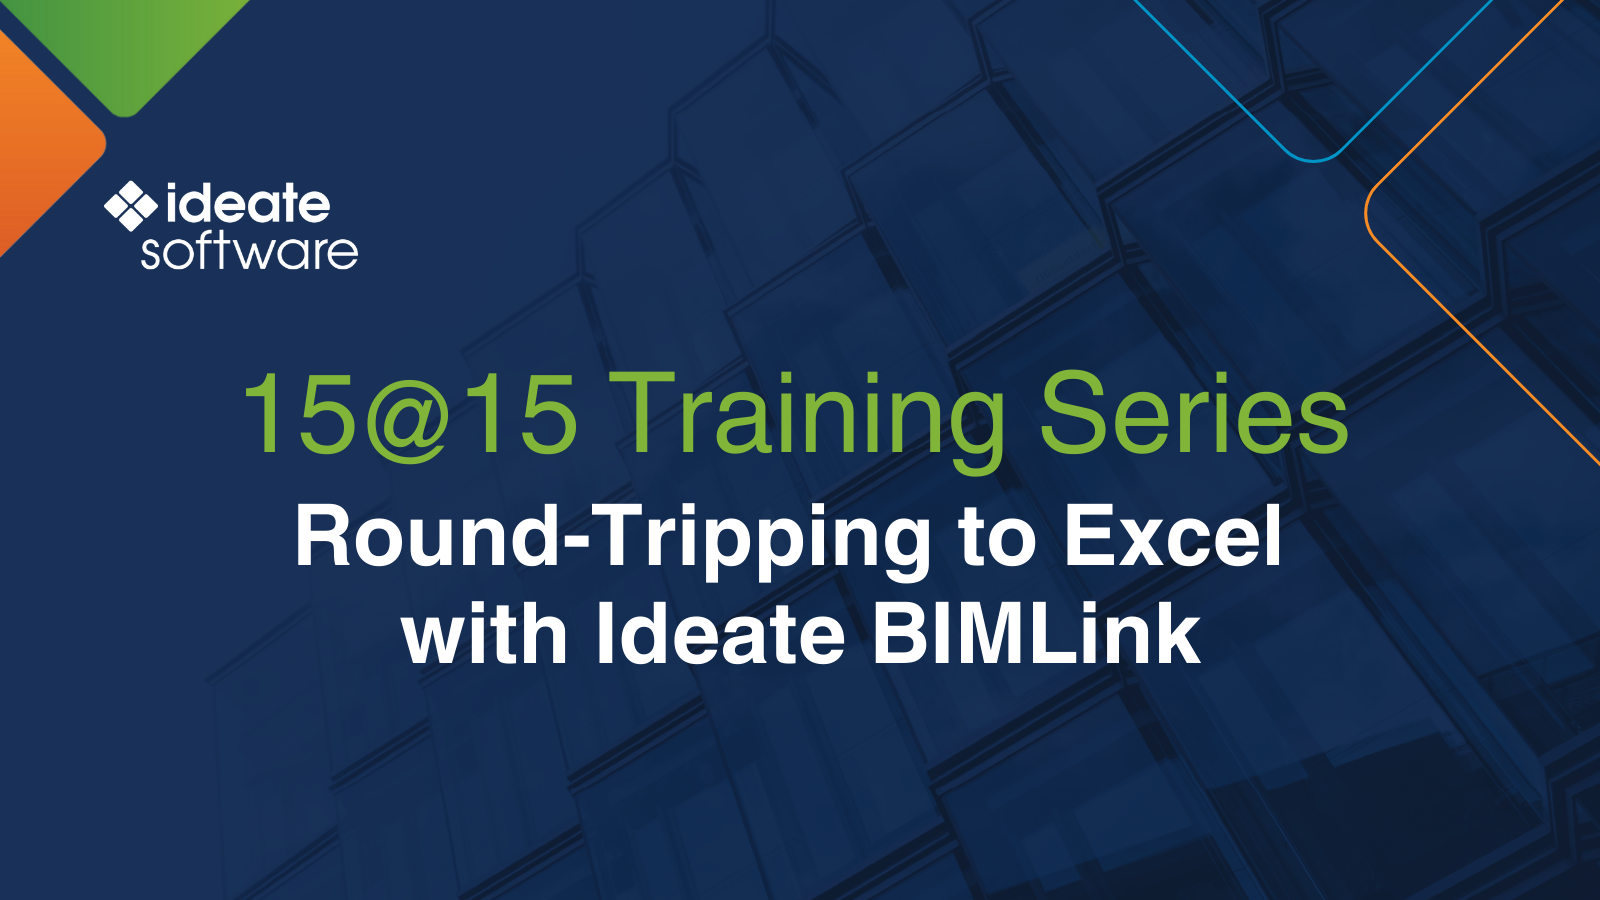 15@15: Round-Tripping to Excel with Ideate BIMLink